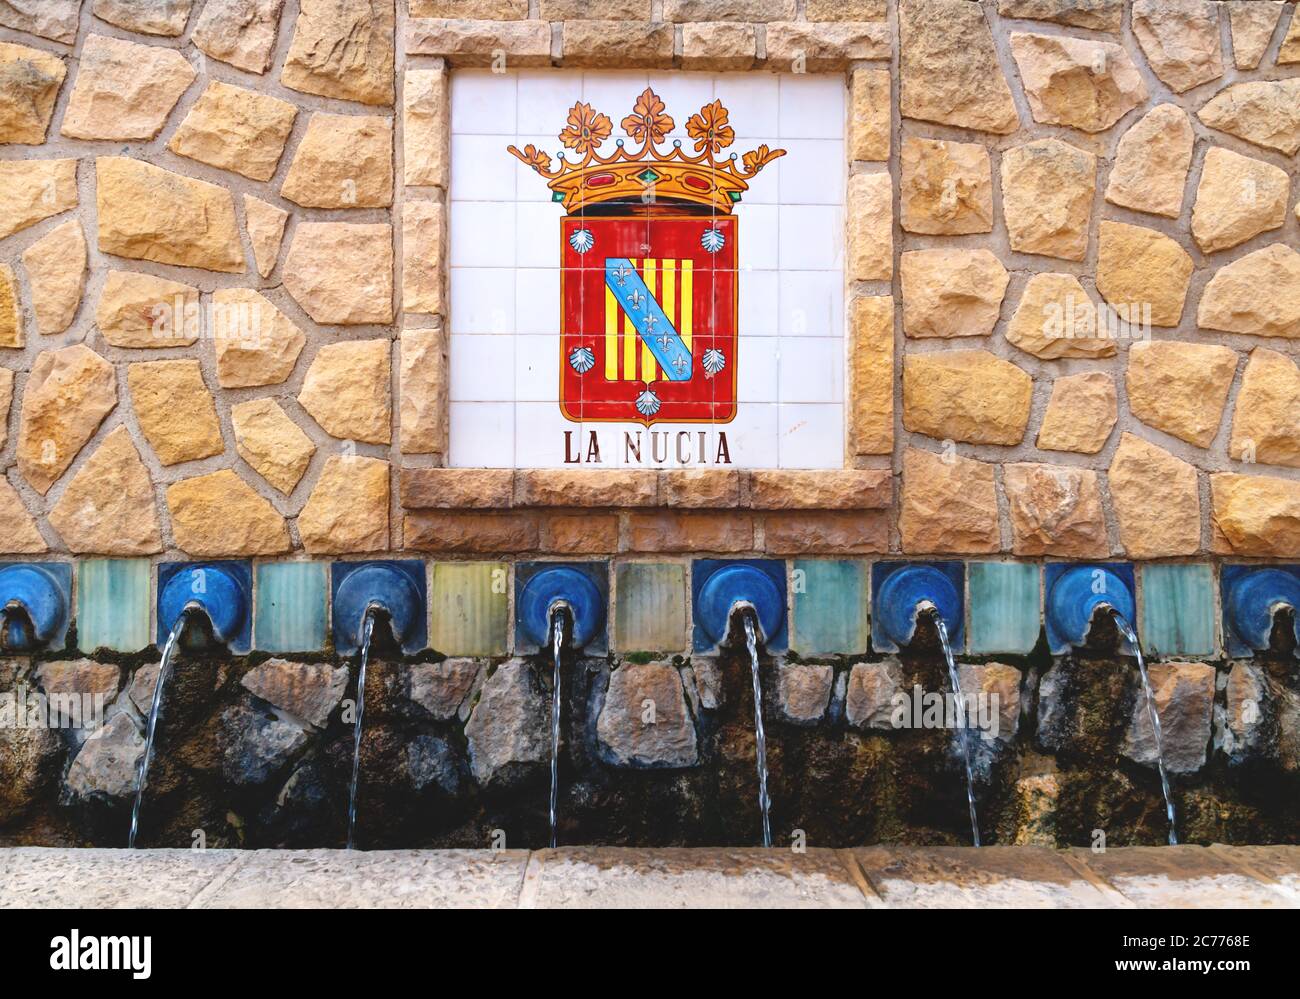 Polop de Marina, Costa Blanca, Spain - 3 Otober 2019: Water fountains with a flag emblem of La Nucia on tiles in the village public park Stock Photo